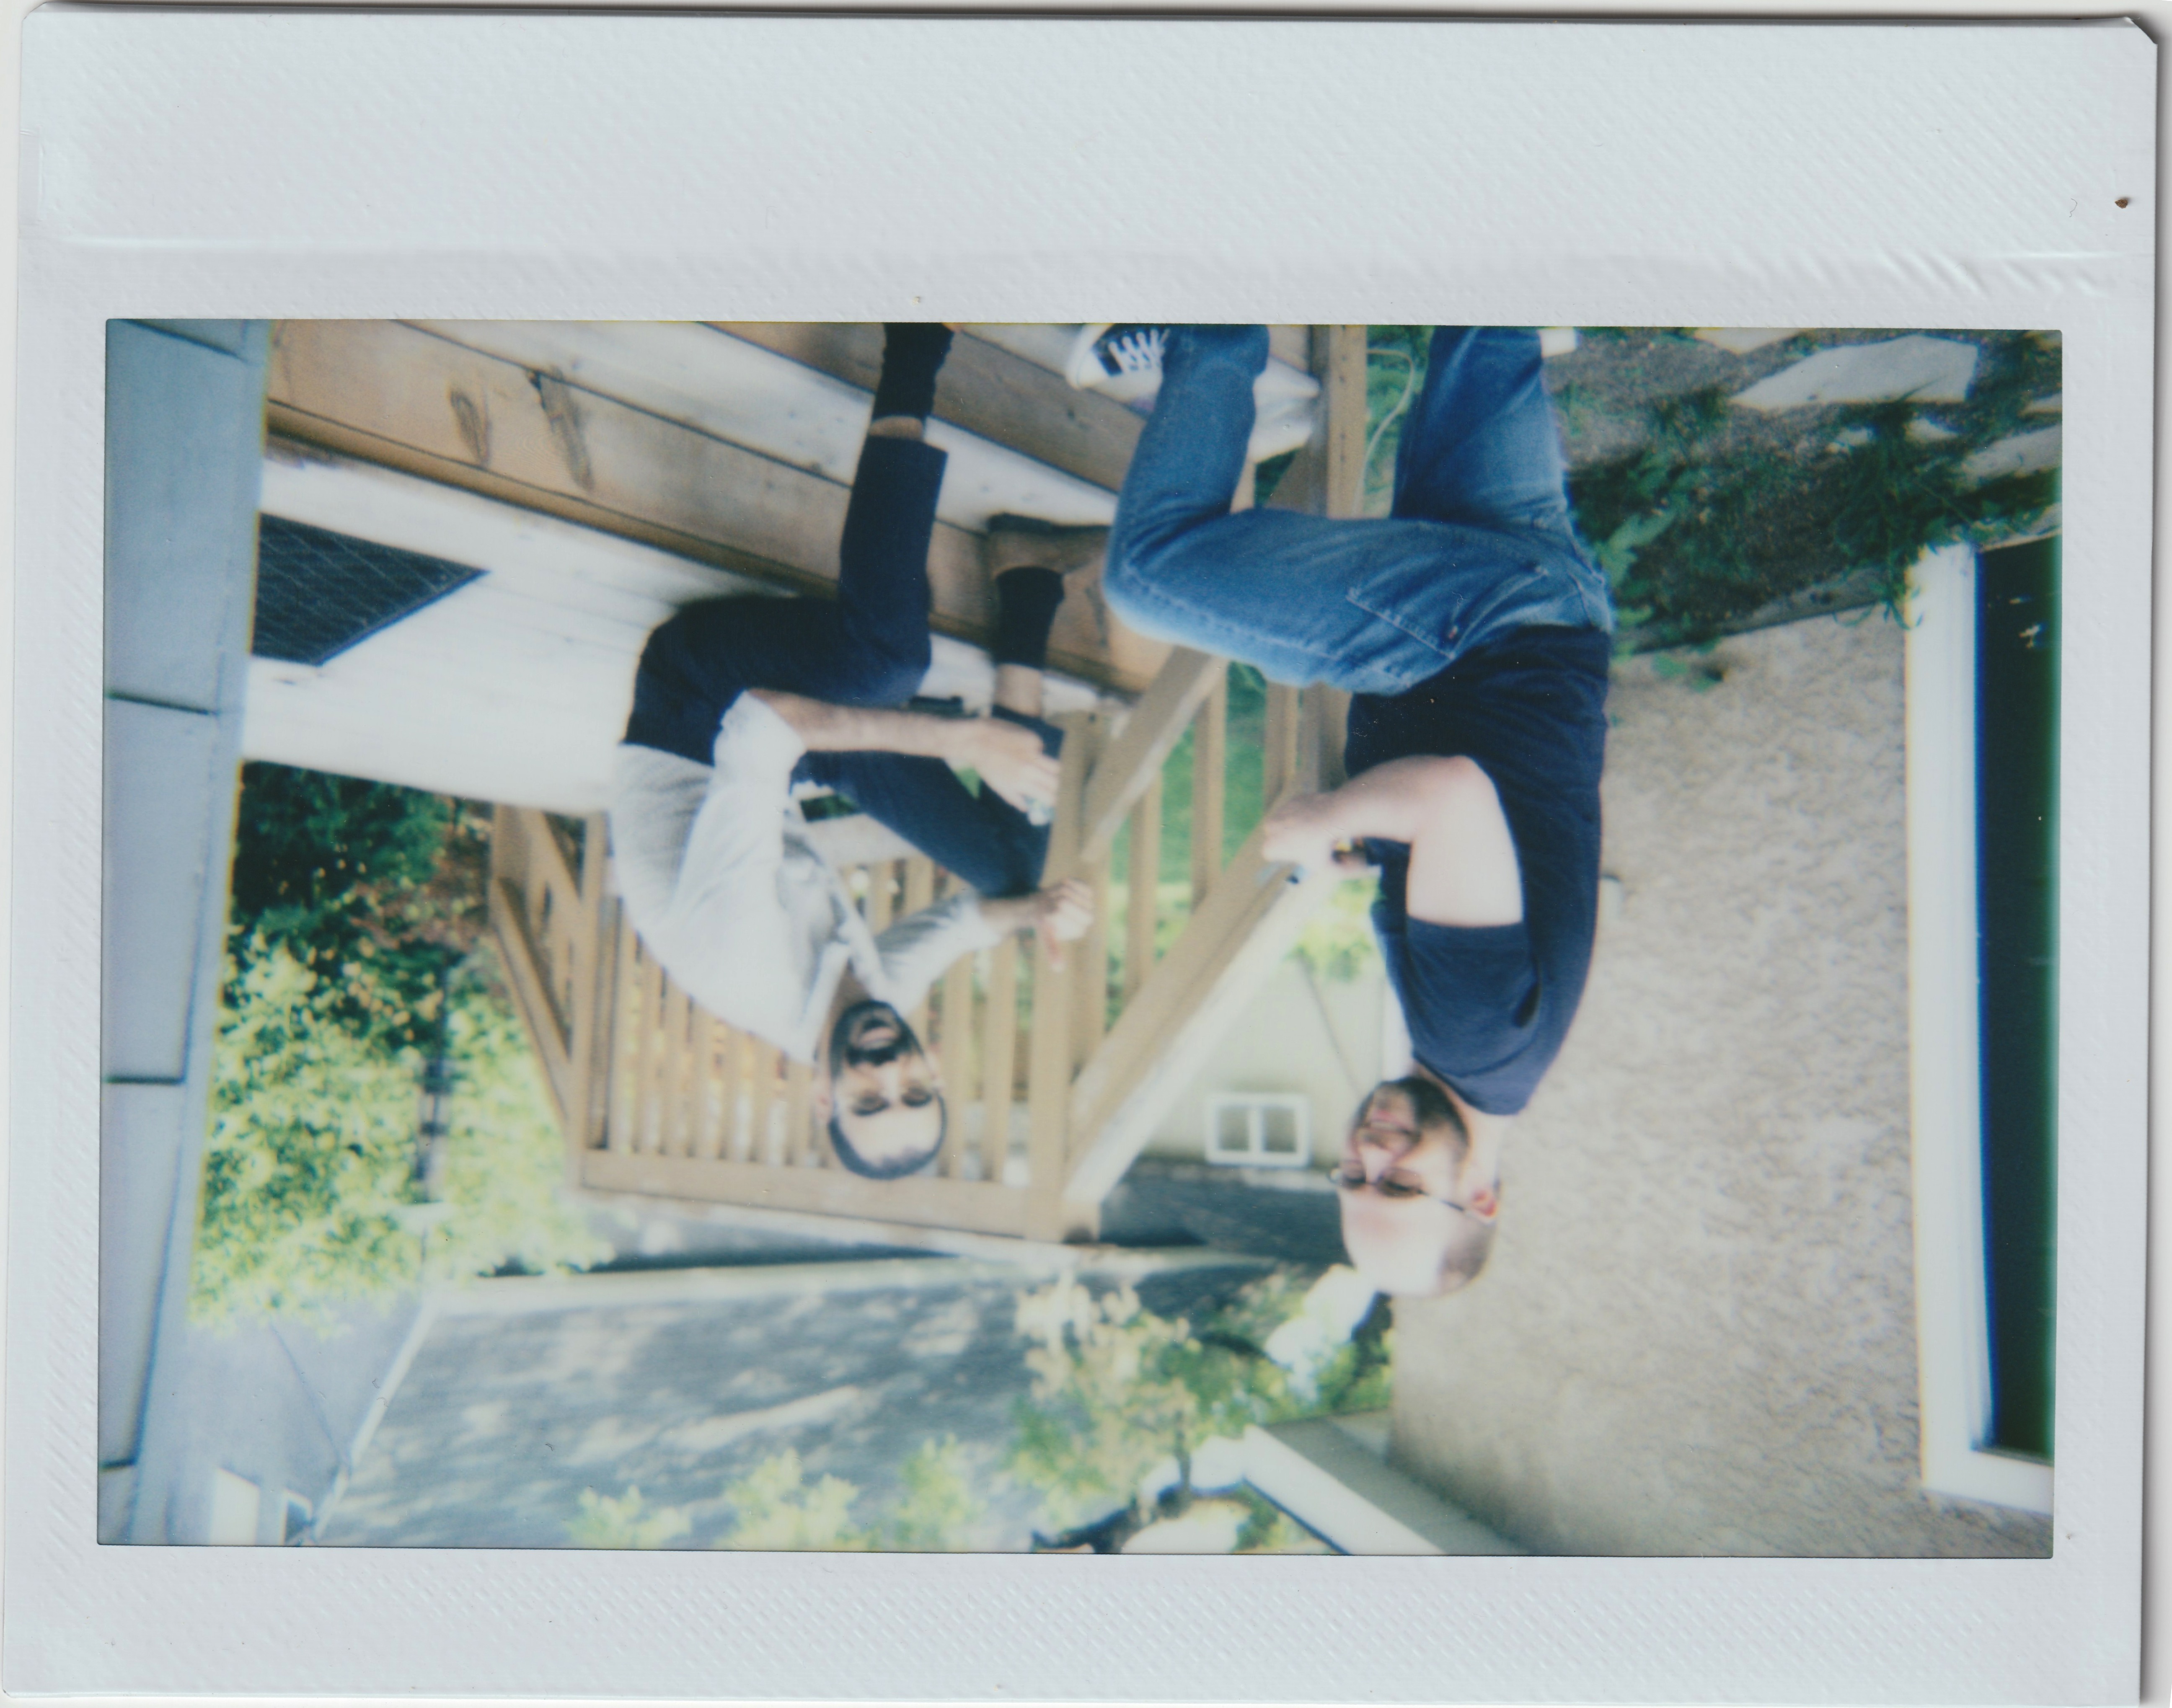 a polaroid of me and edwub2166